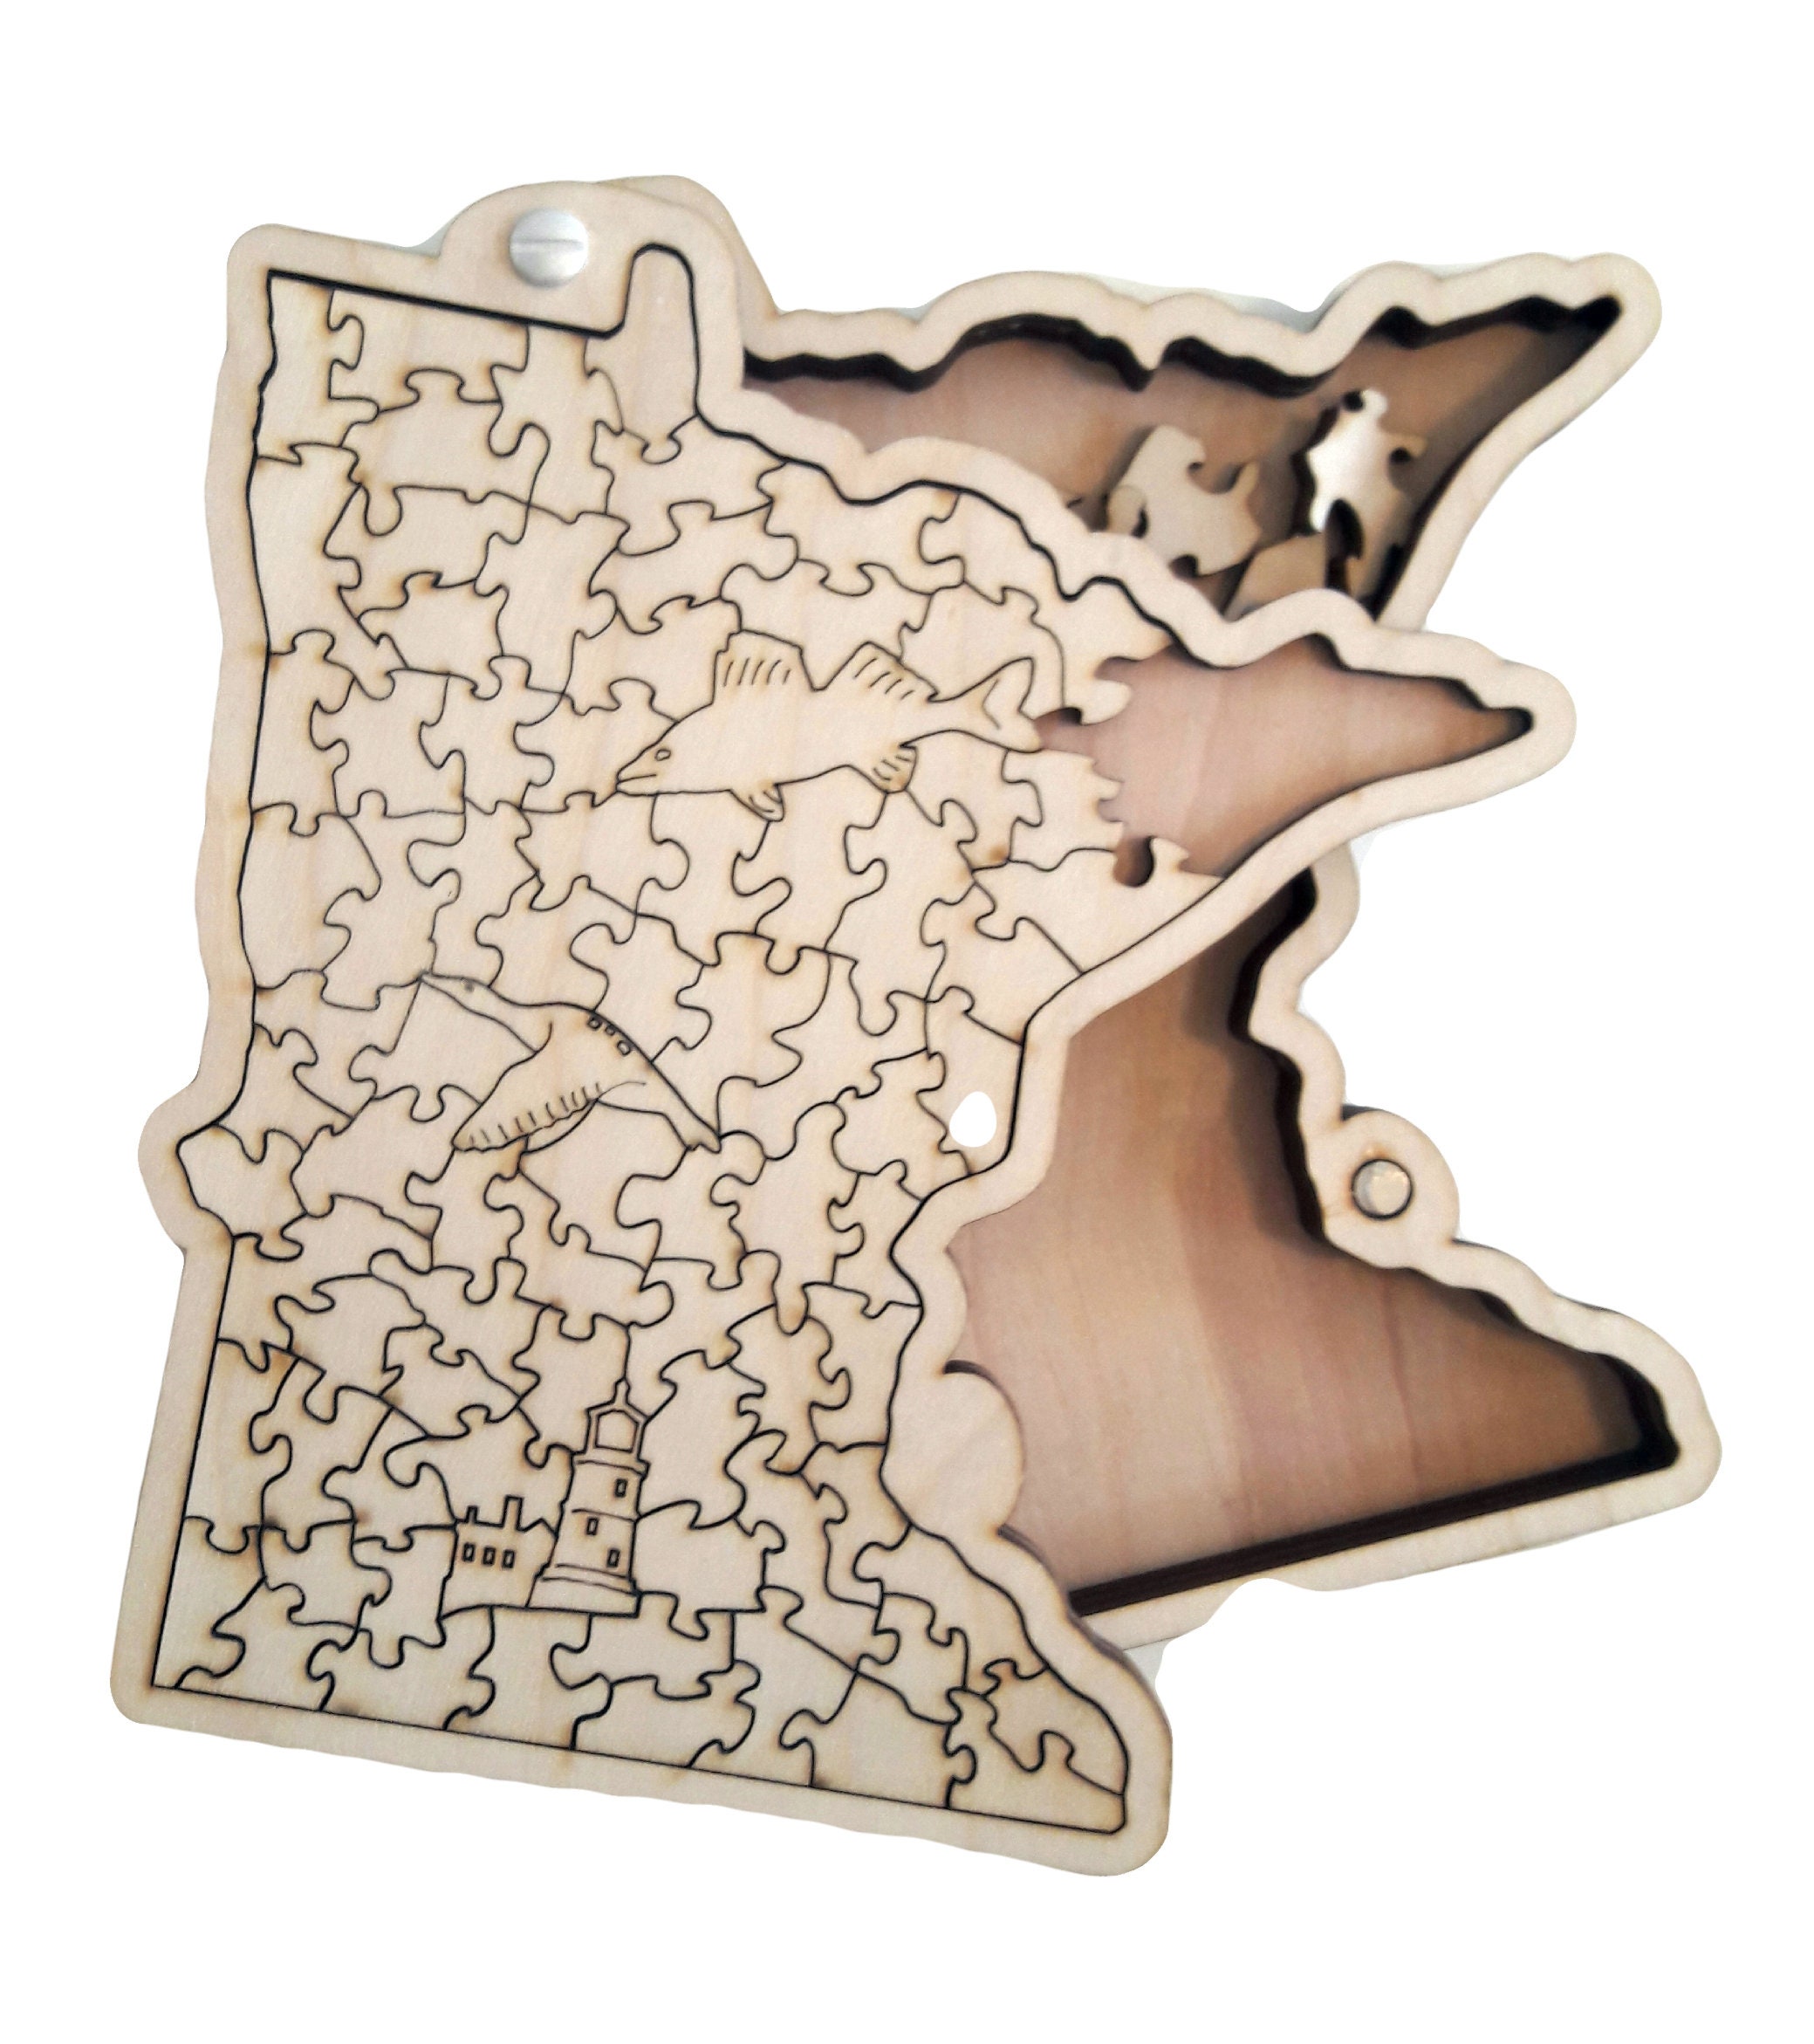 State of Kansas wooden jigsaw puzzle with box